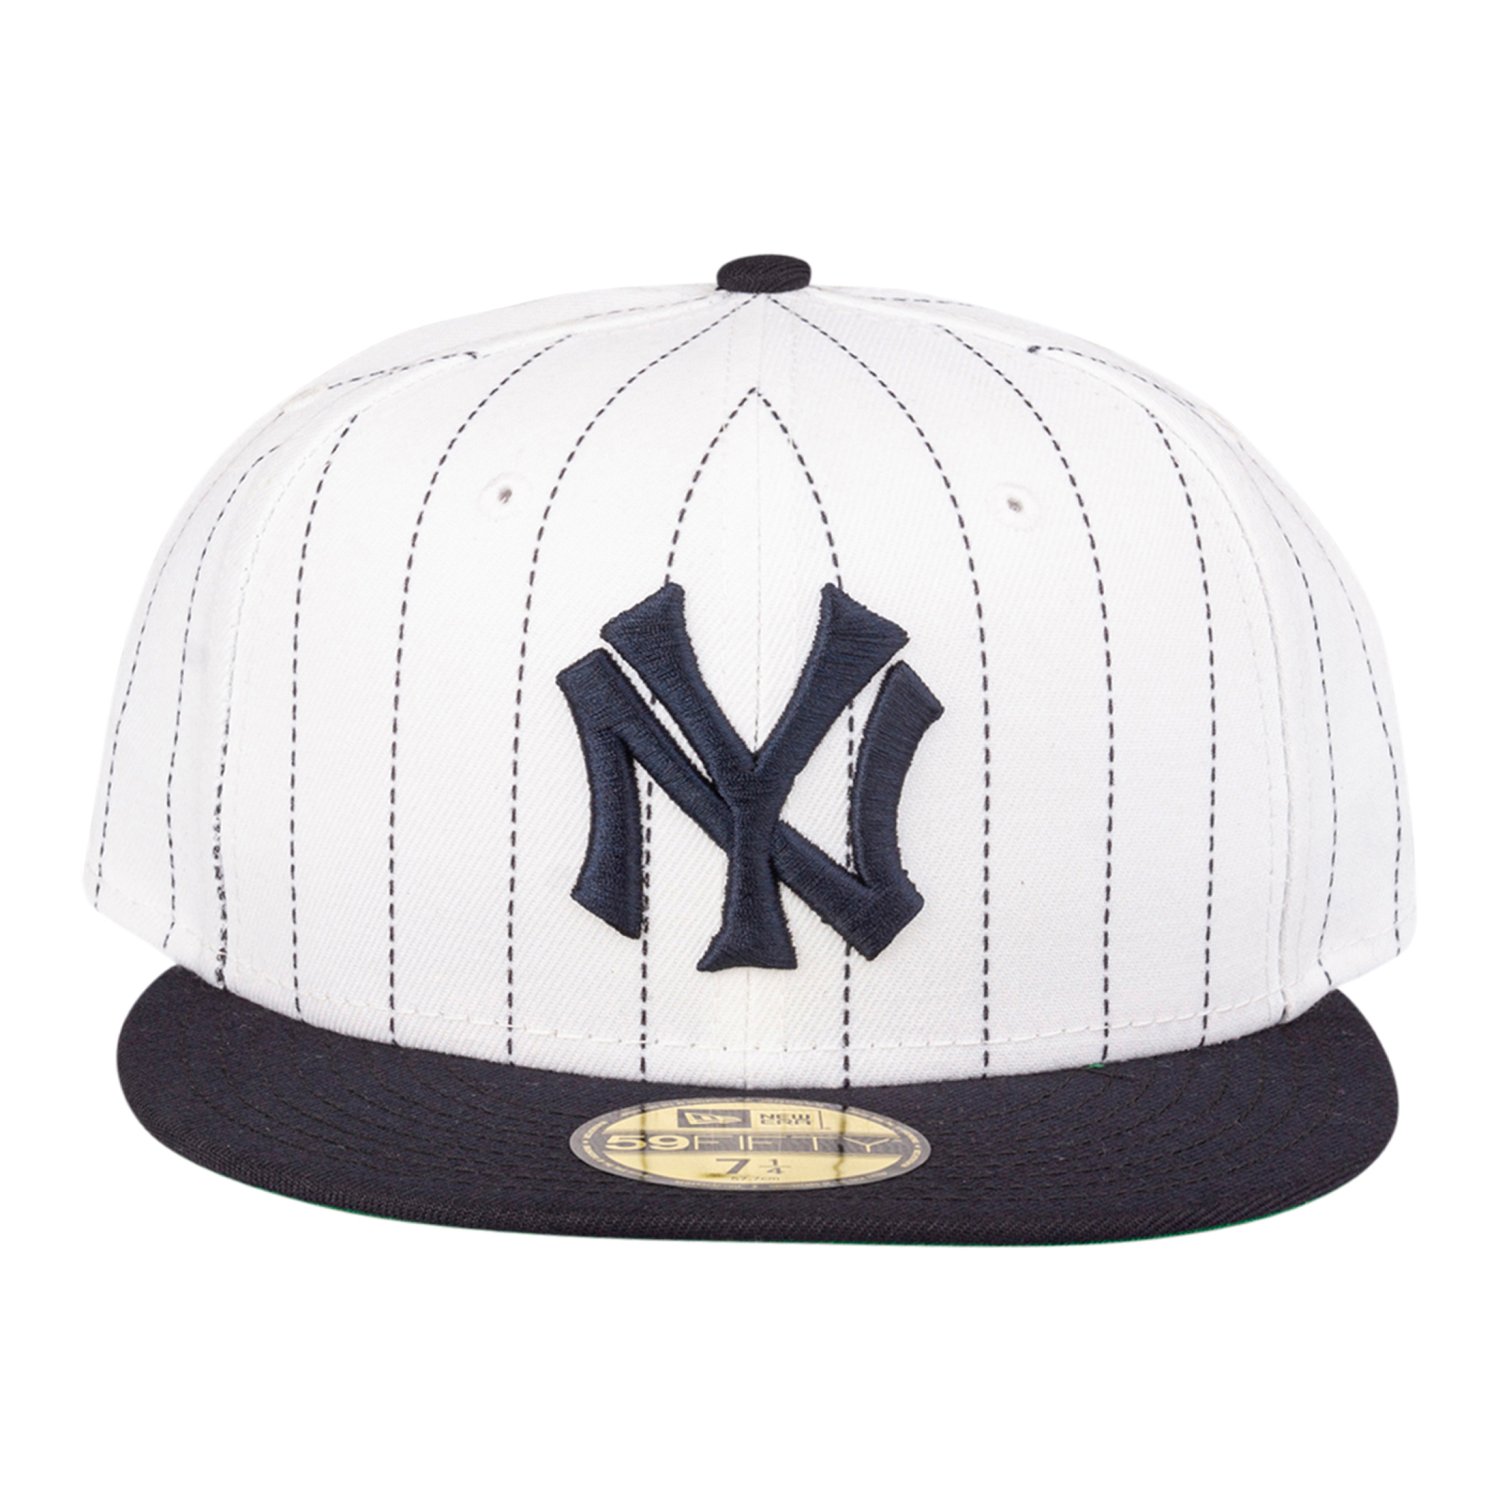 New Era 59Fifty Fitted Cap PINSTRIPE NY Yankees cooperstown 